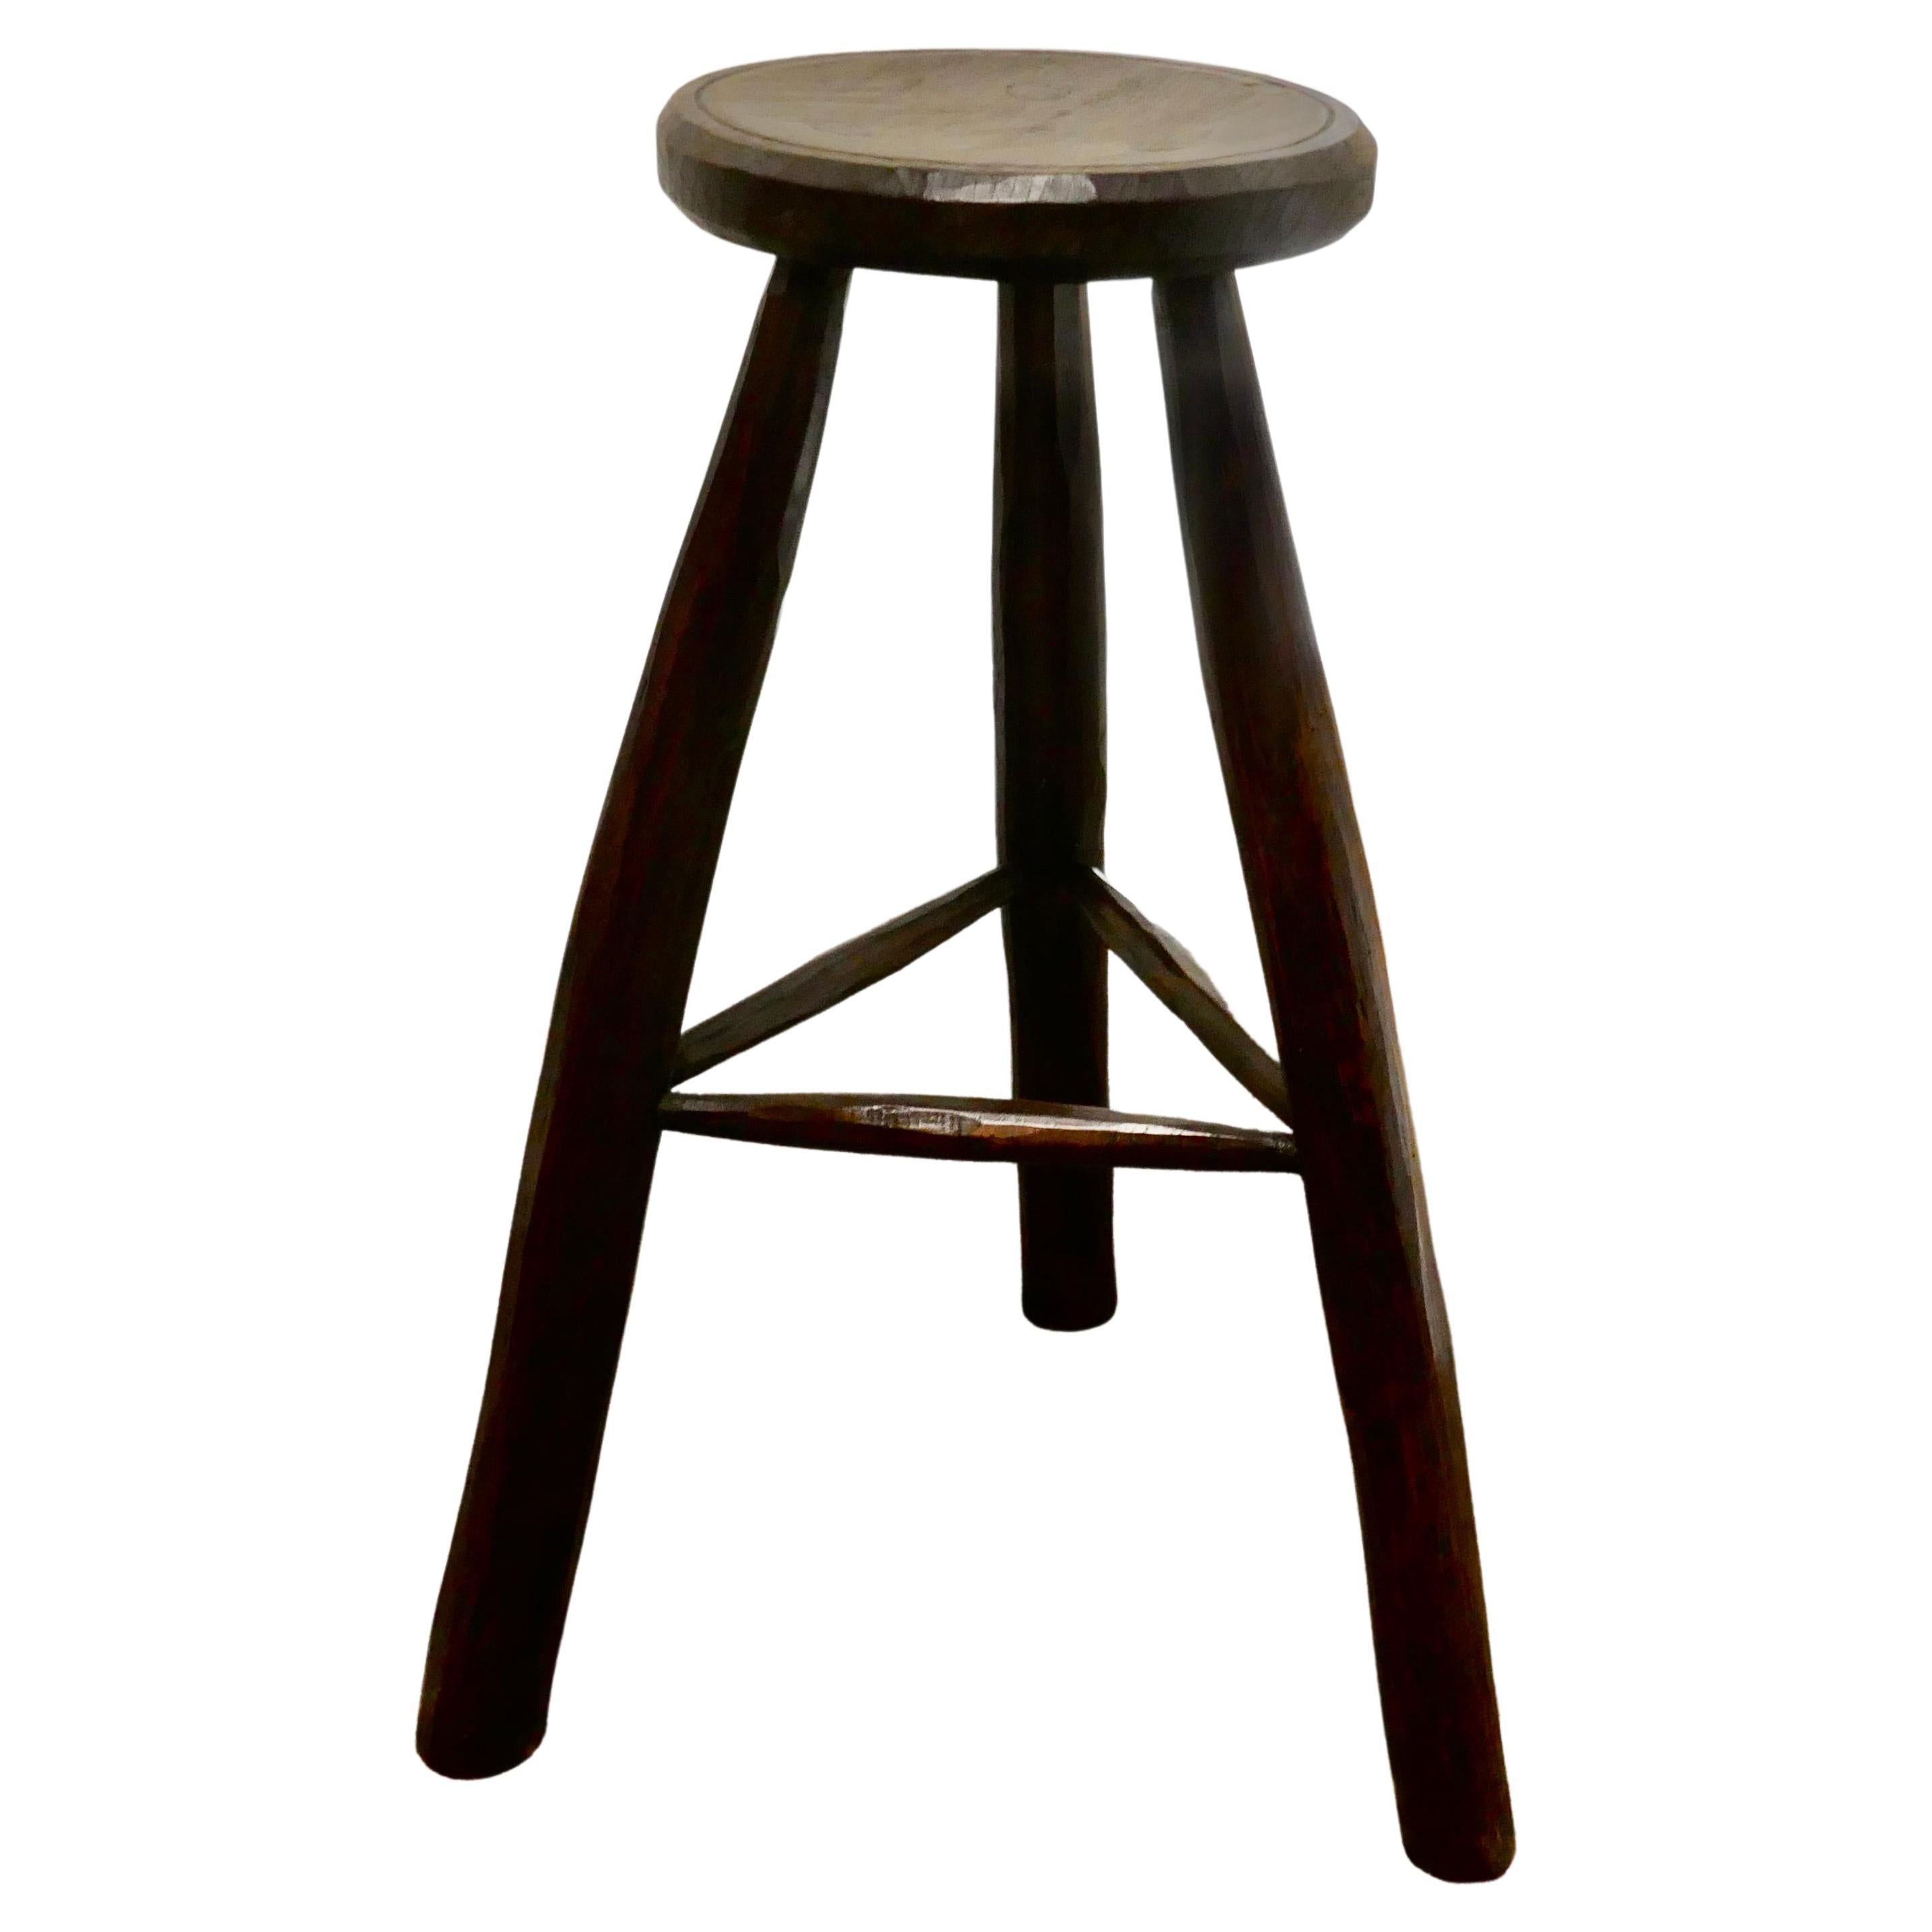 Very Rustic 19th Century French High Stool